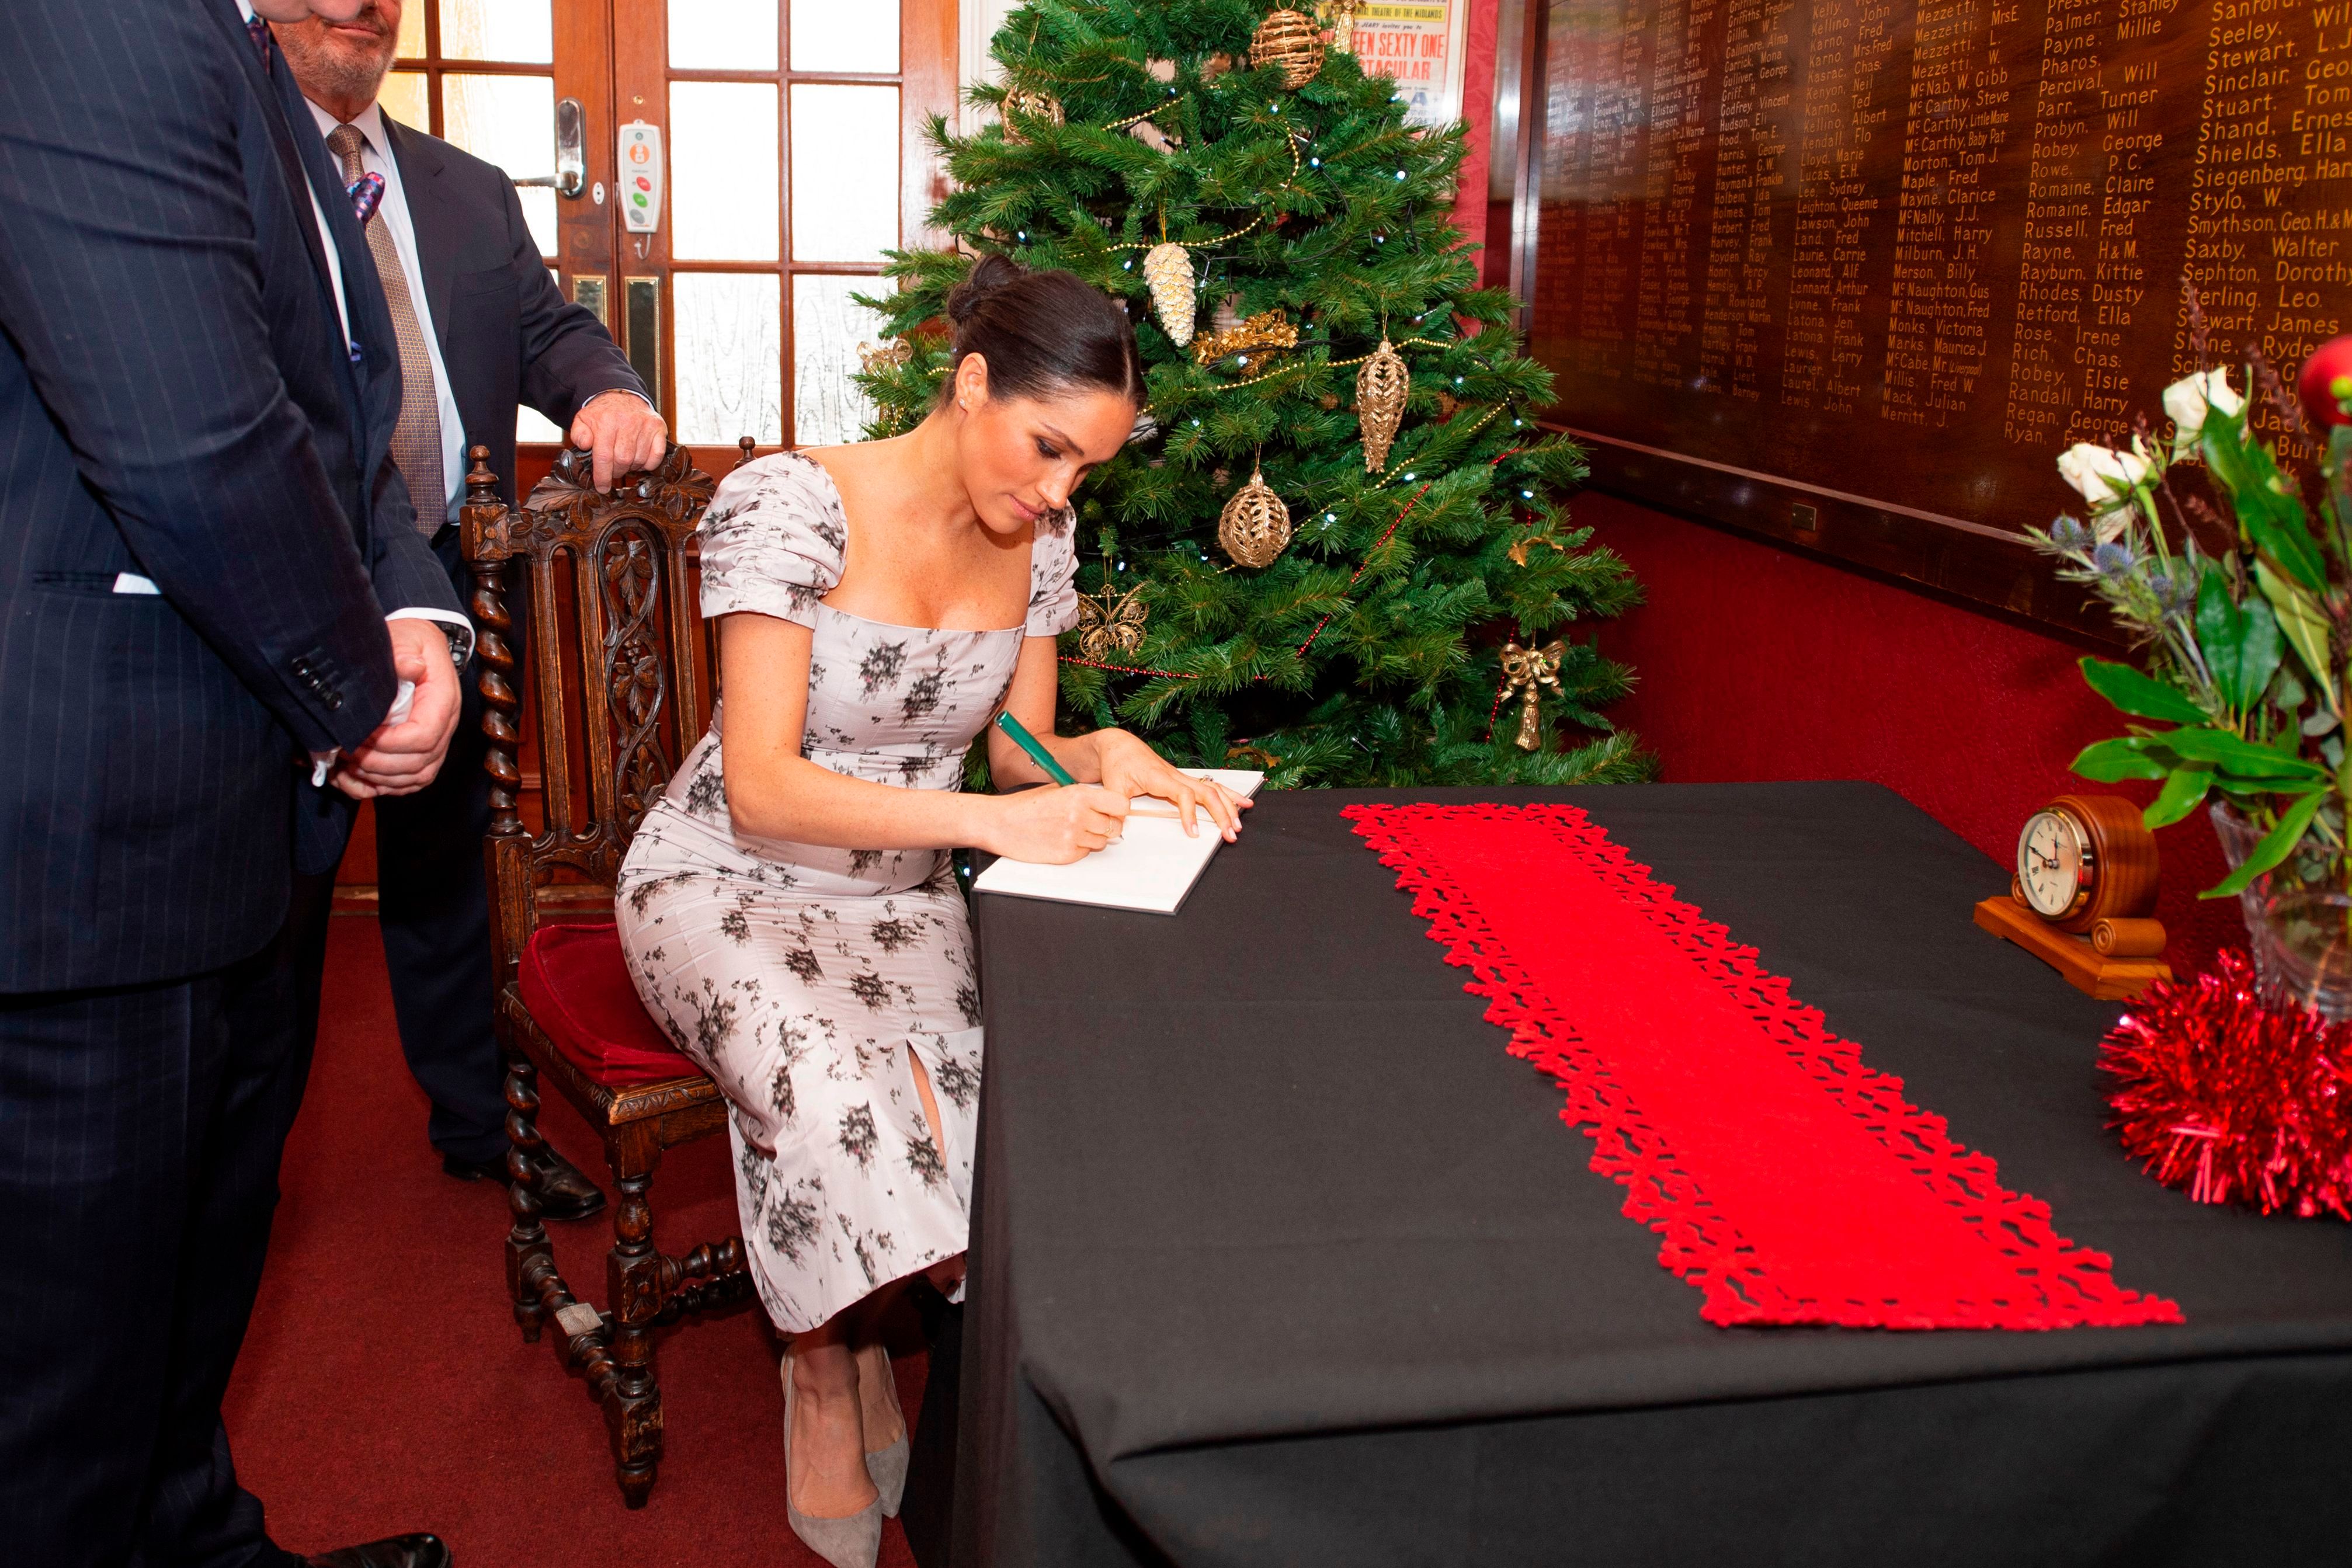 Meghan Markle during her visit to the Royal Variety Charity's residential nursing and care home, Brinsworth House in Twickenham, south west London on December 18, 2018. | Source: Getty Images